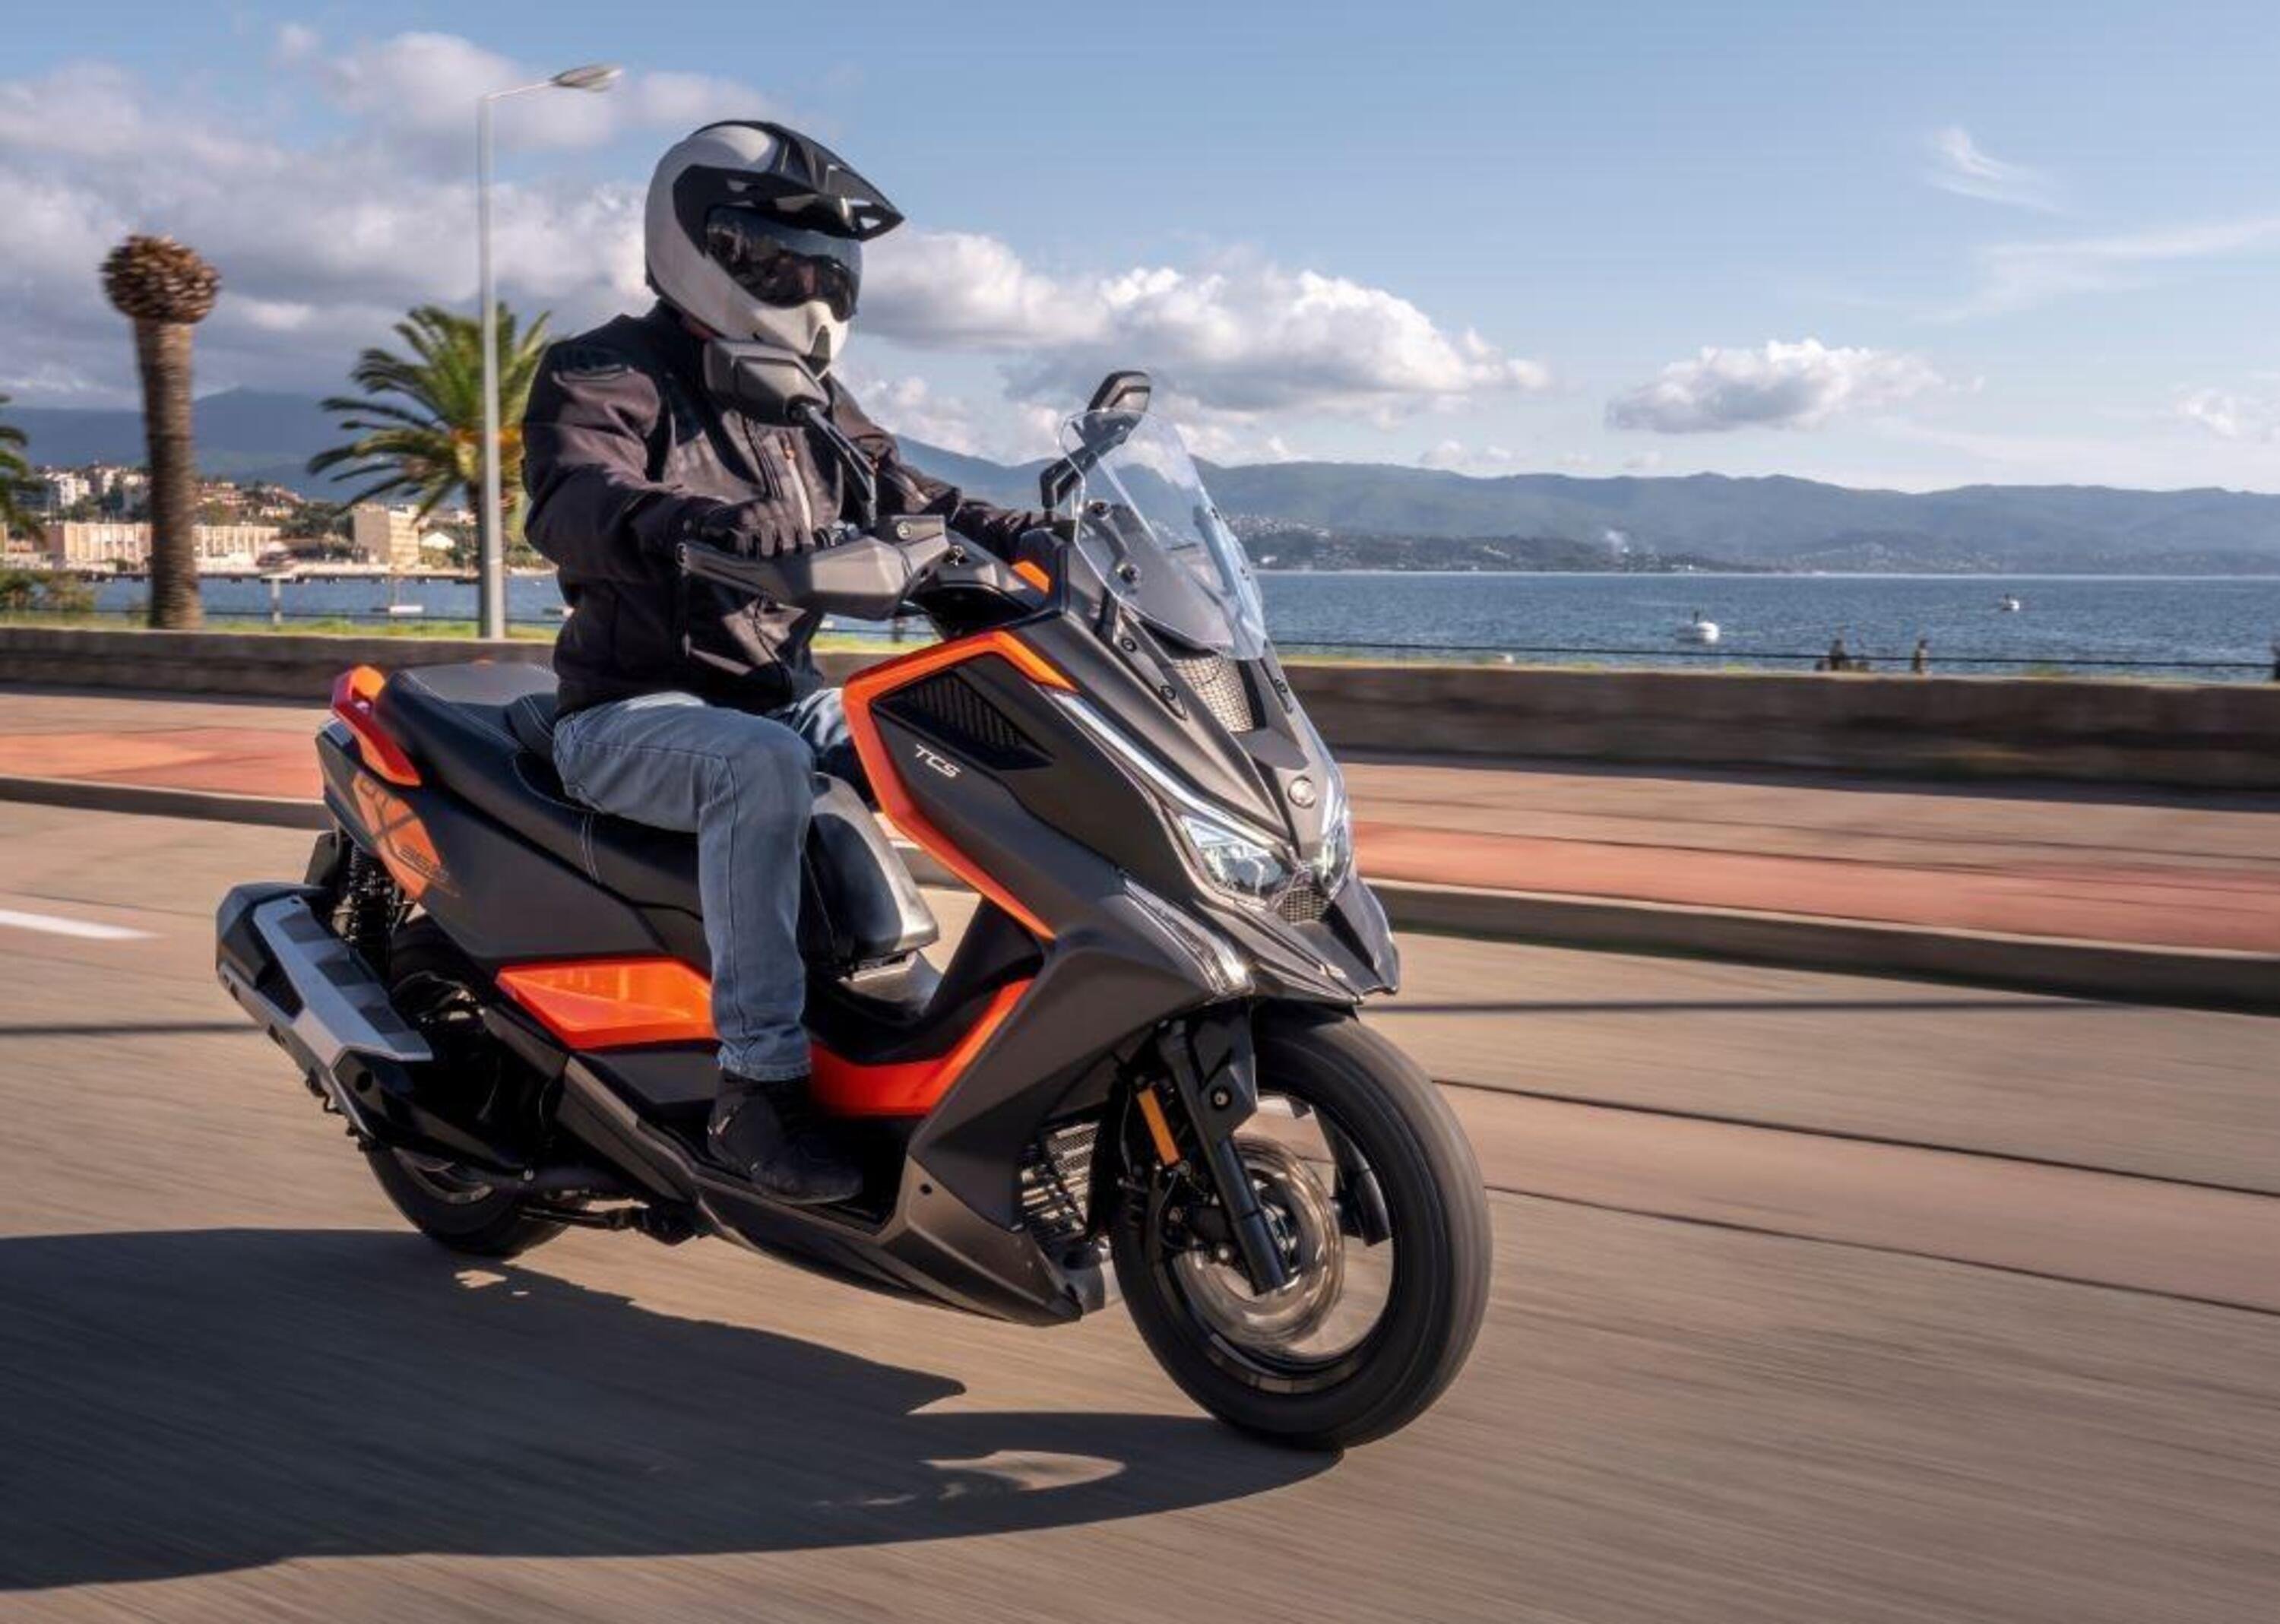 Nuovo Kymco DT X360 2021. Il mood &egrave; Crossover